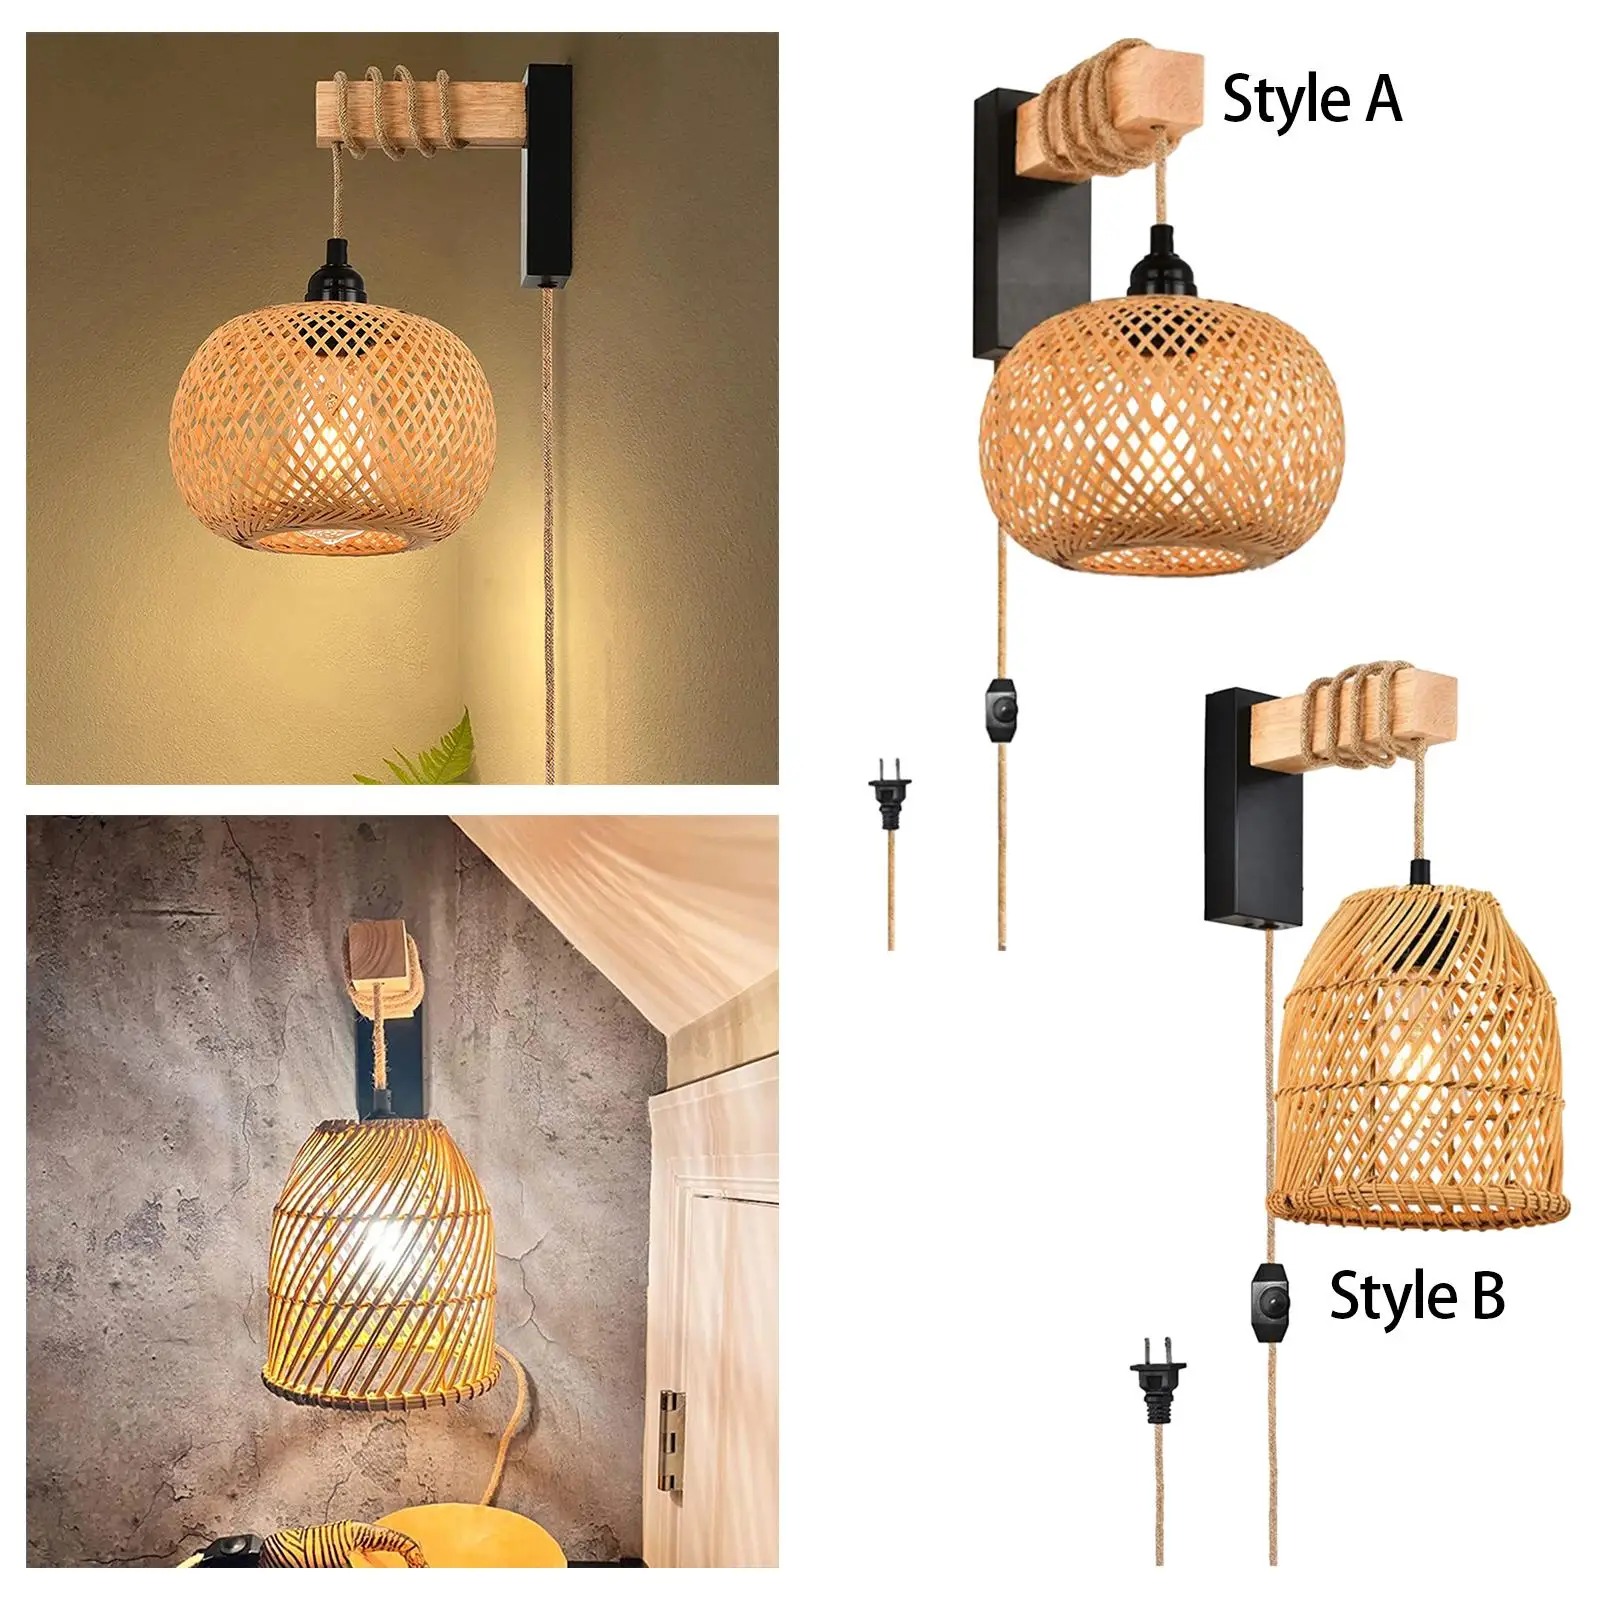 Wall Lamp with Wood Arm Bamboo Rustic Lantern Wall Light Plug in Wall Sconce for Bedroom Living Room Hotel Cafe Farmhouse